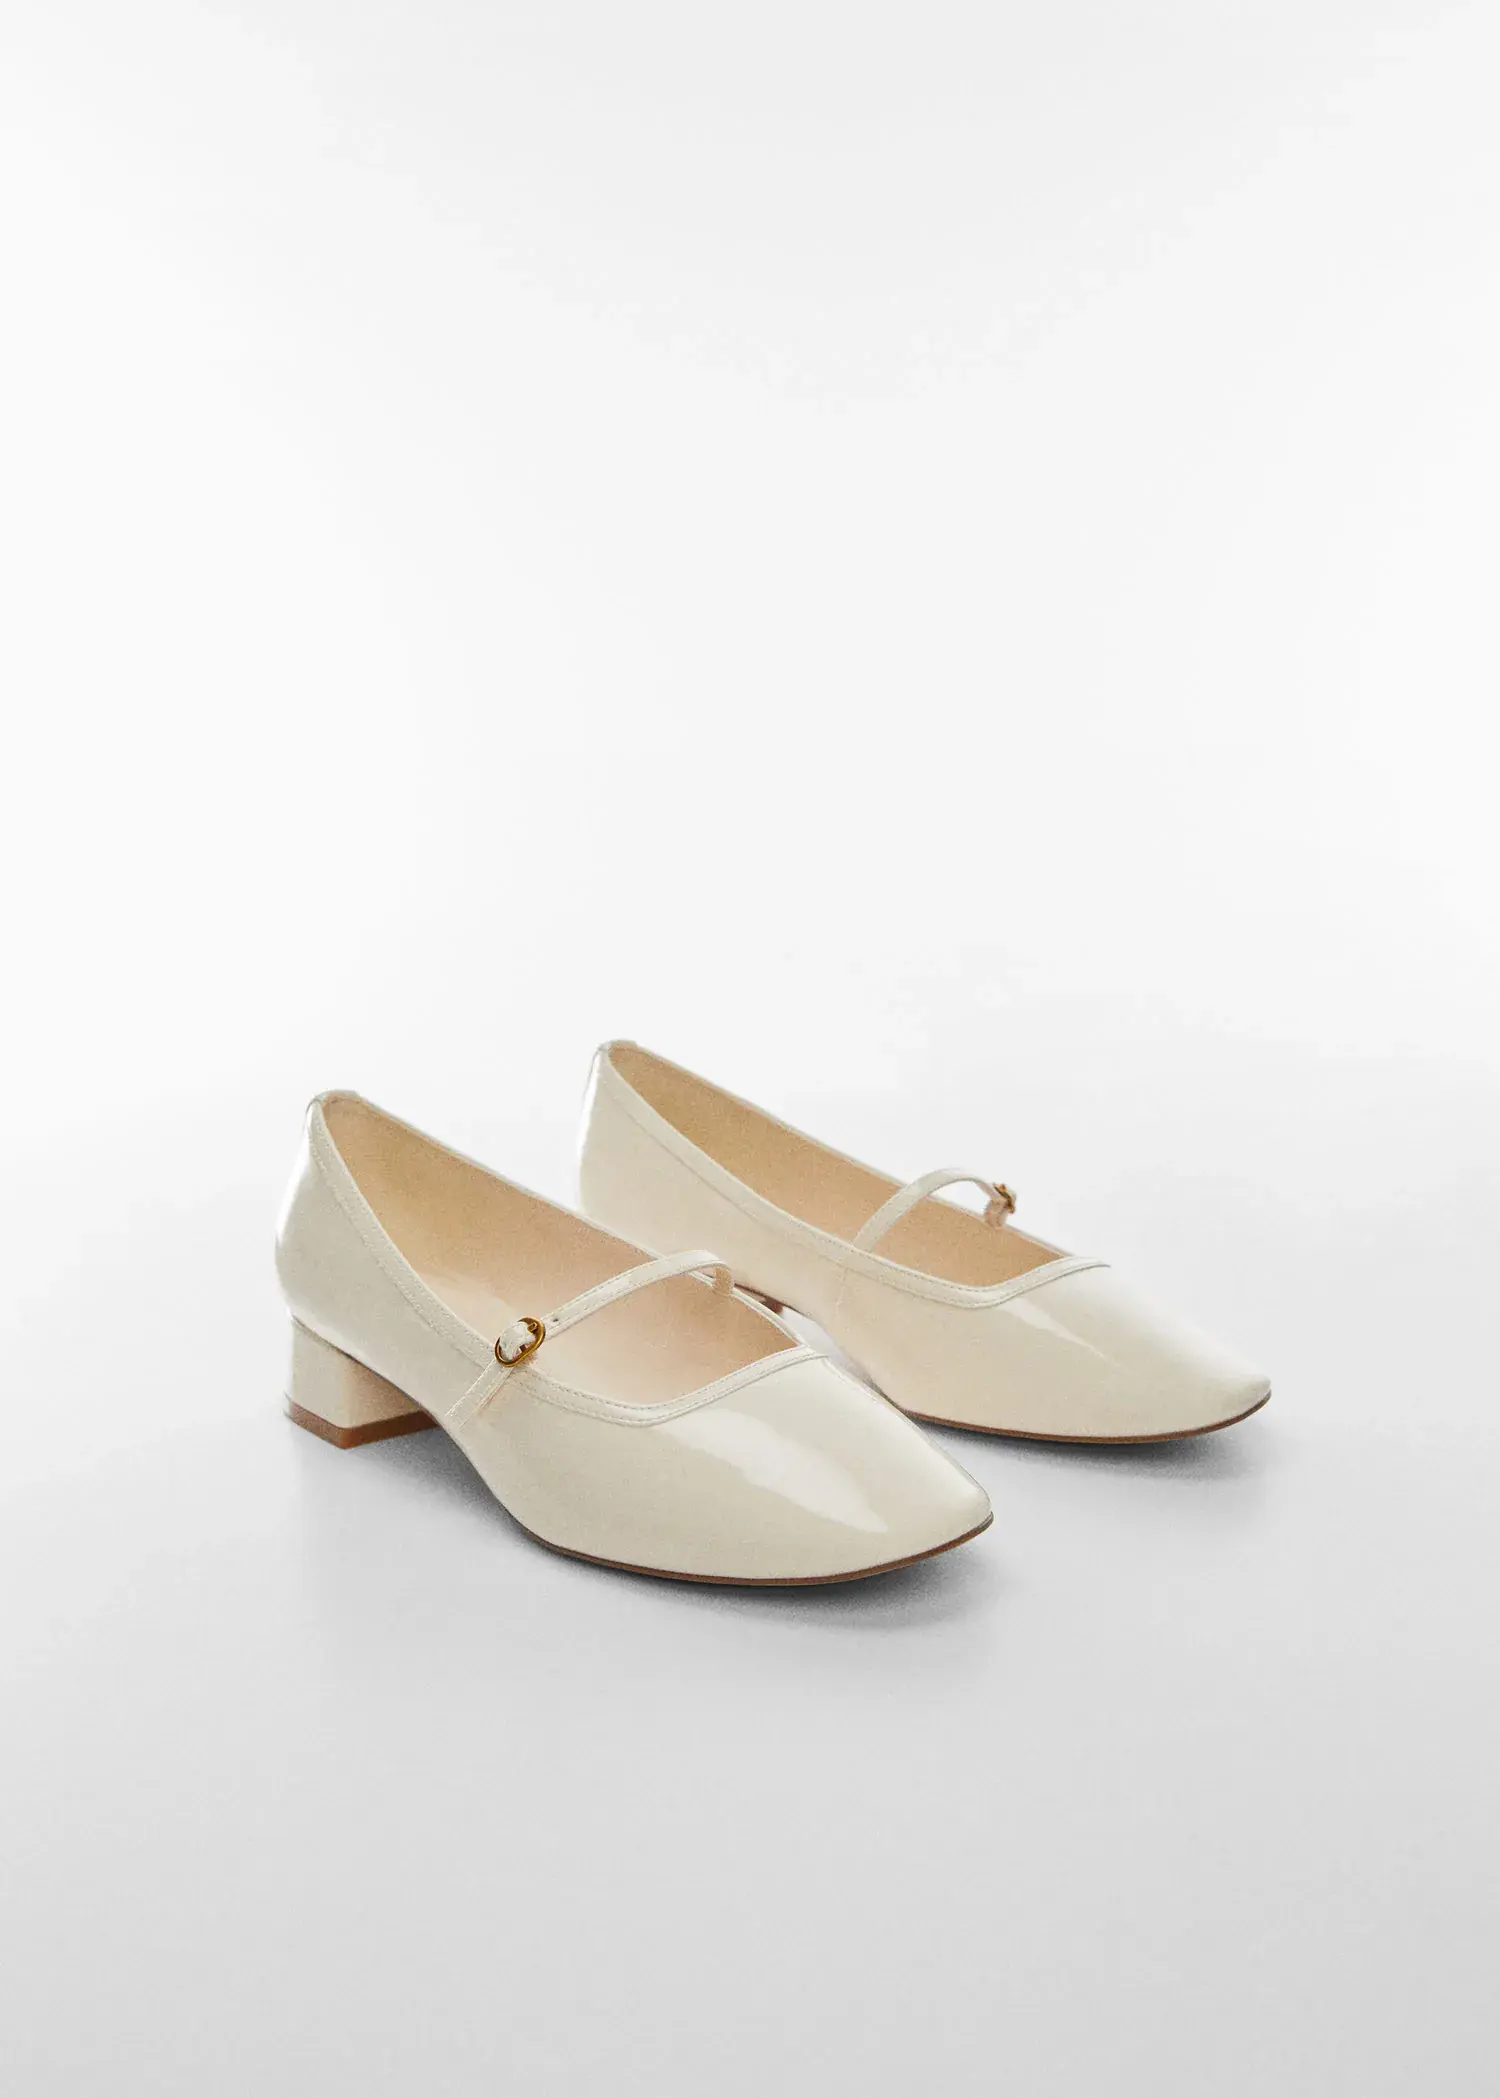 Mango Buckle heel shoes. a pair of shoes that are on the ground. 